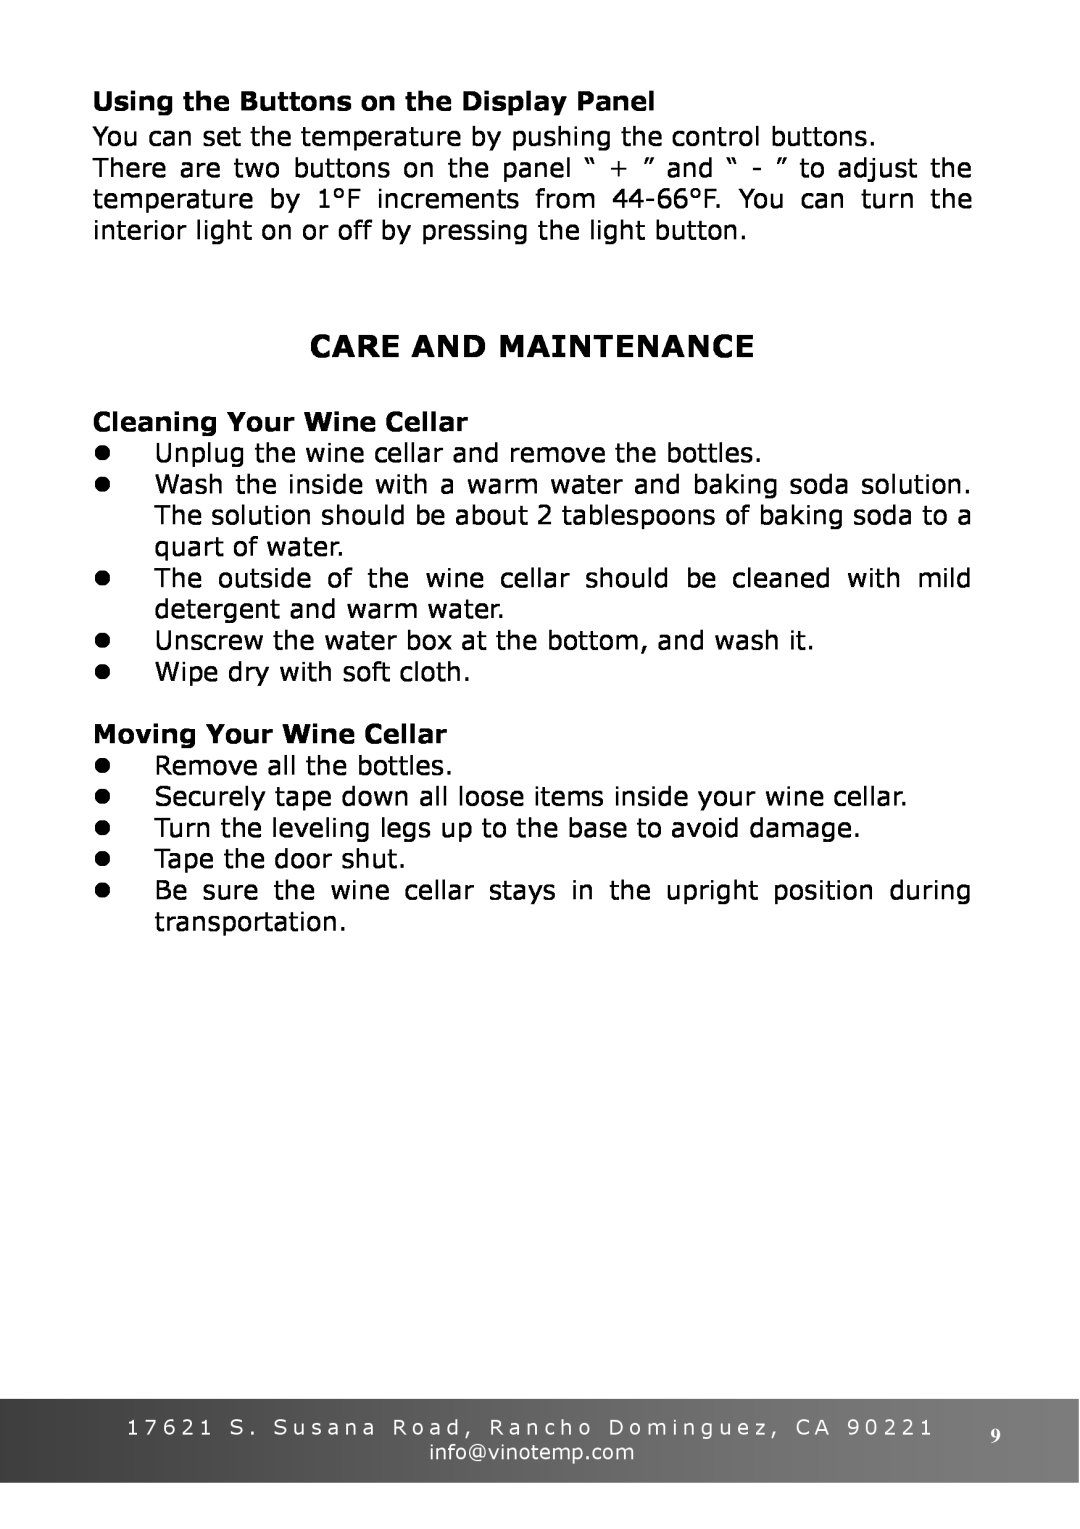 Vinotemp VT-6TEDS owner manual Care And Maintenance, Using the Buttons on the Display Panel, Cleaning Your Wine Cellar 